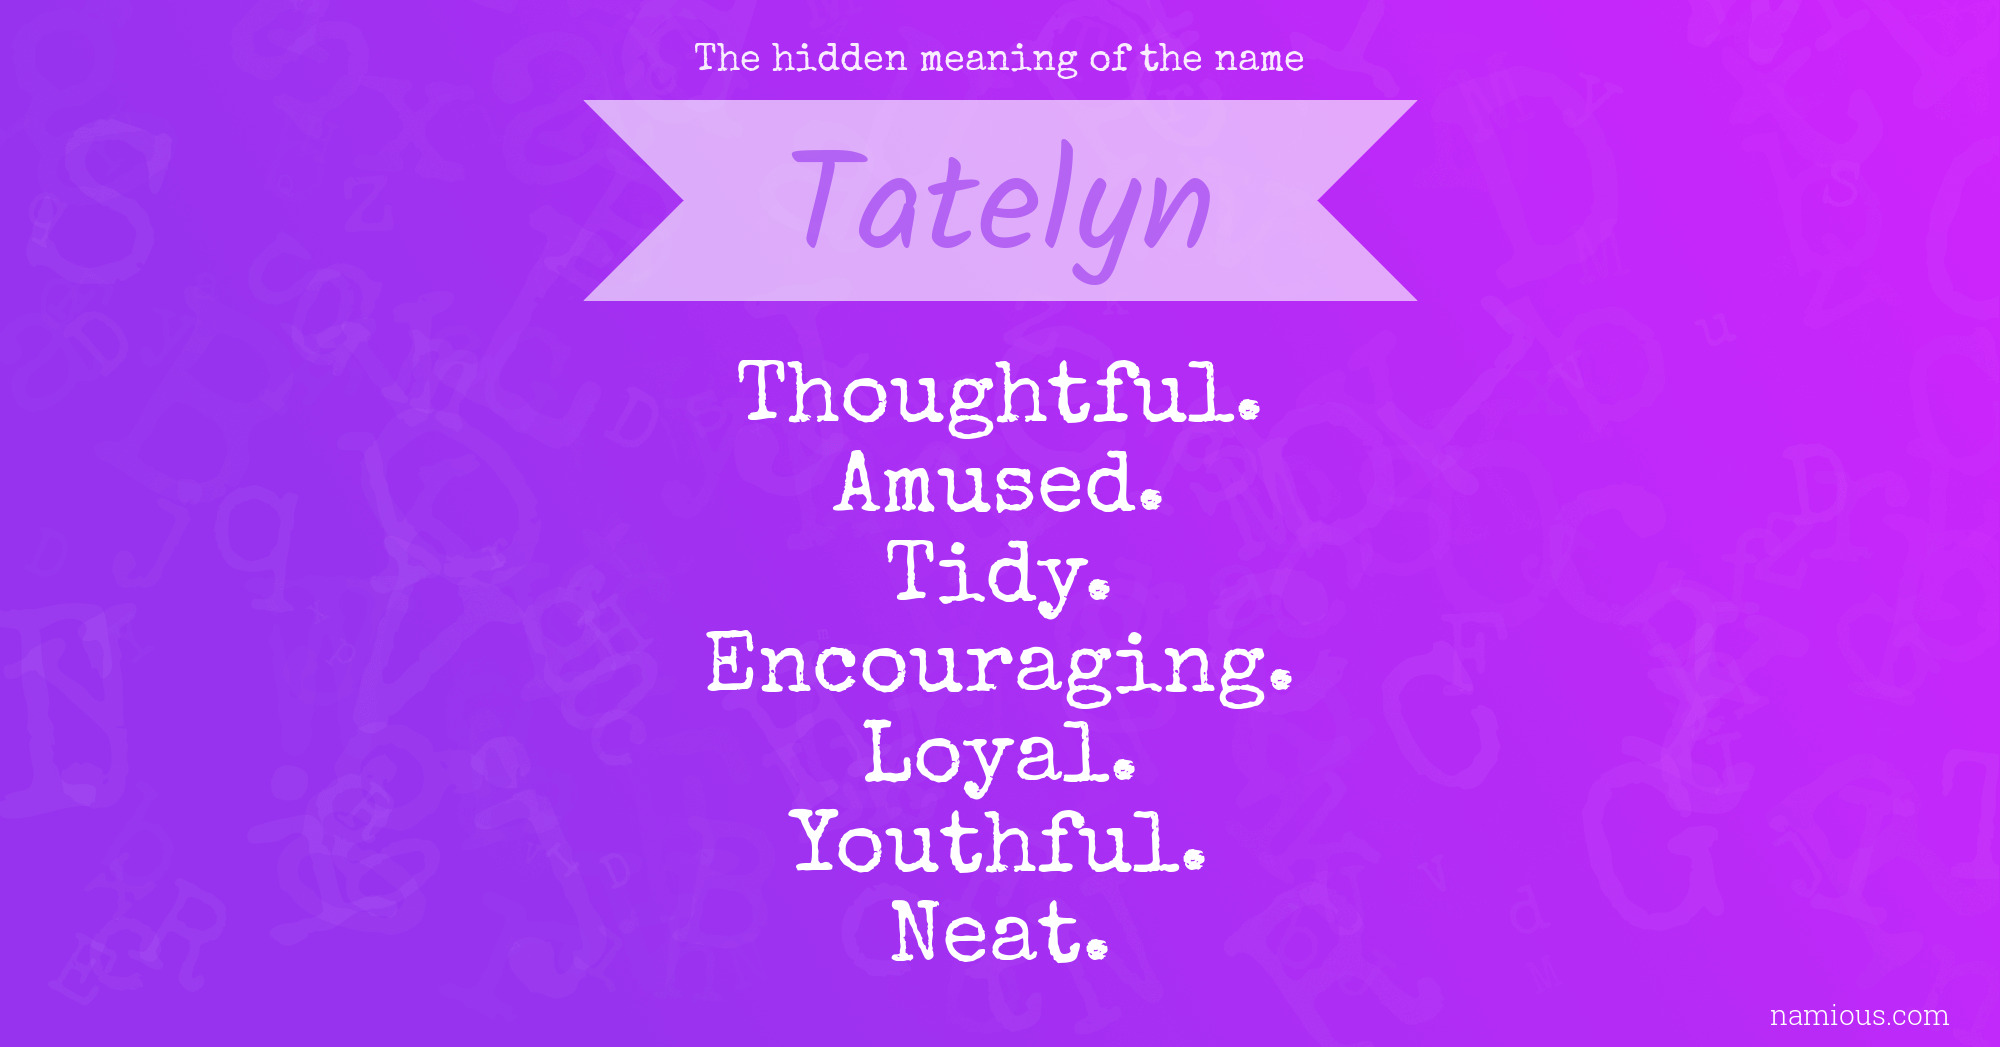 The hidden meaning of the name Tatelyn